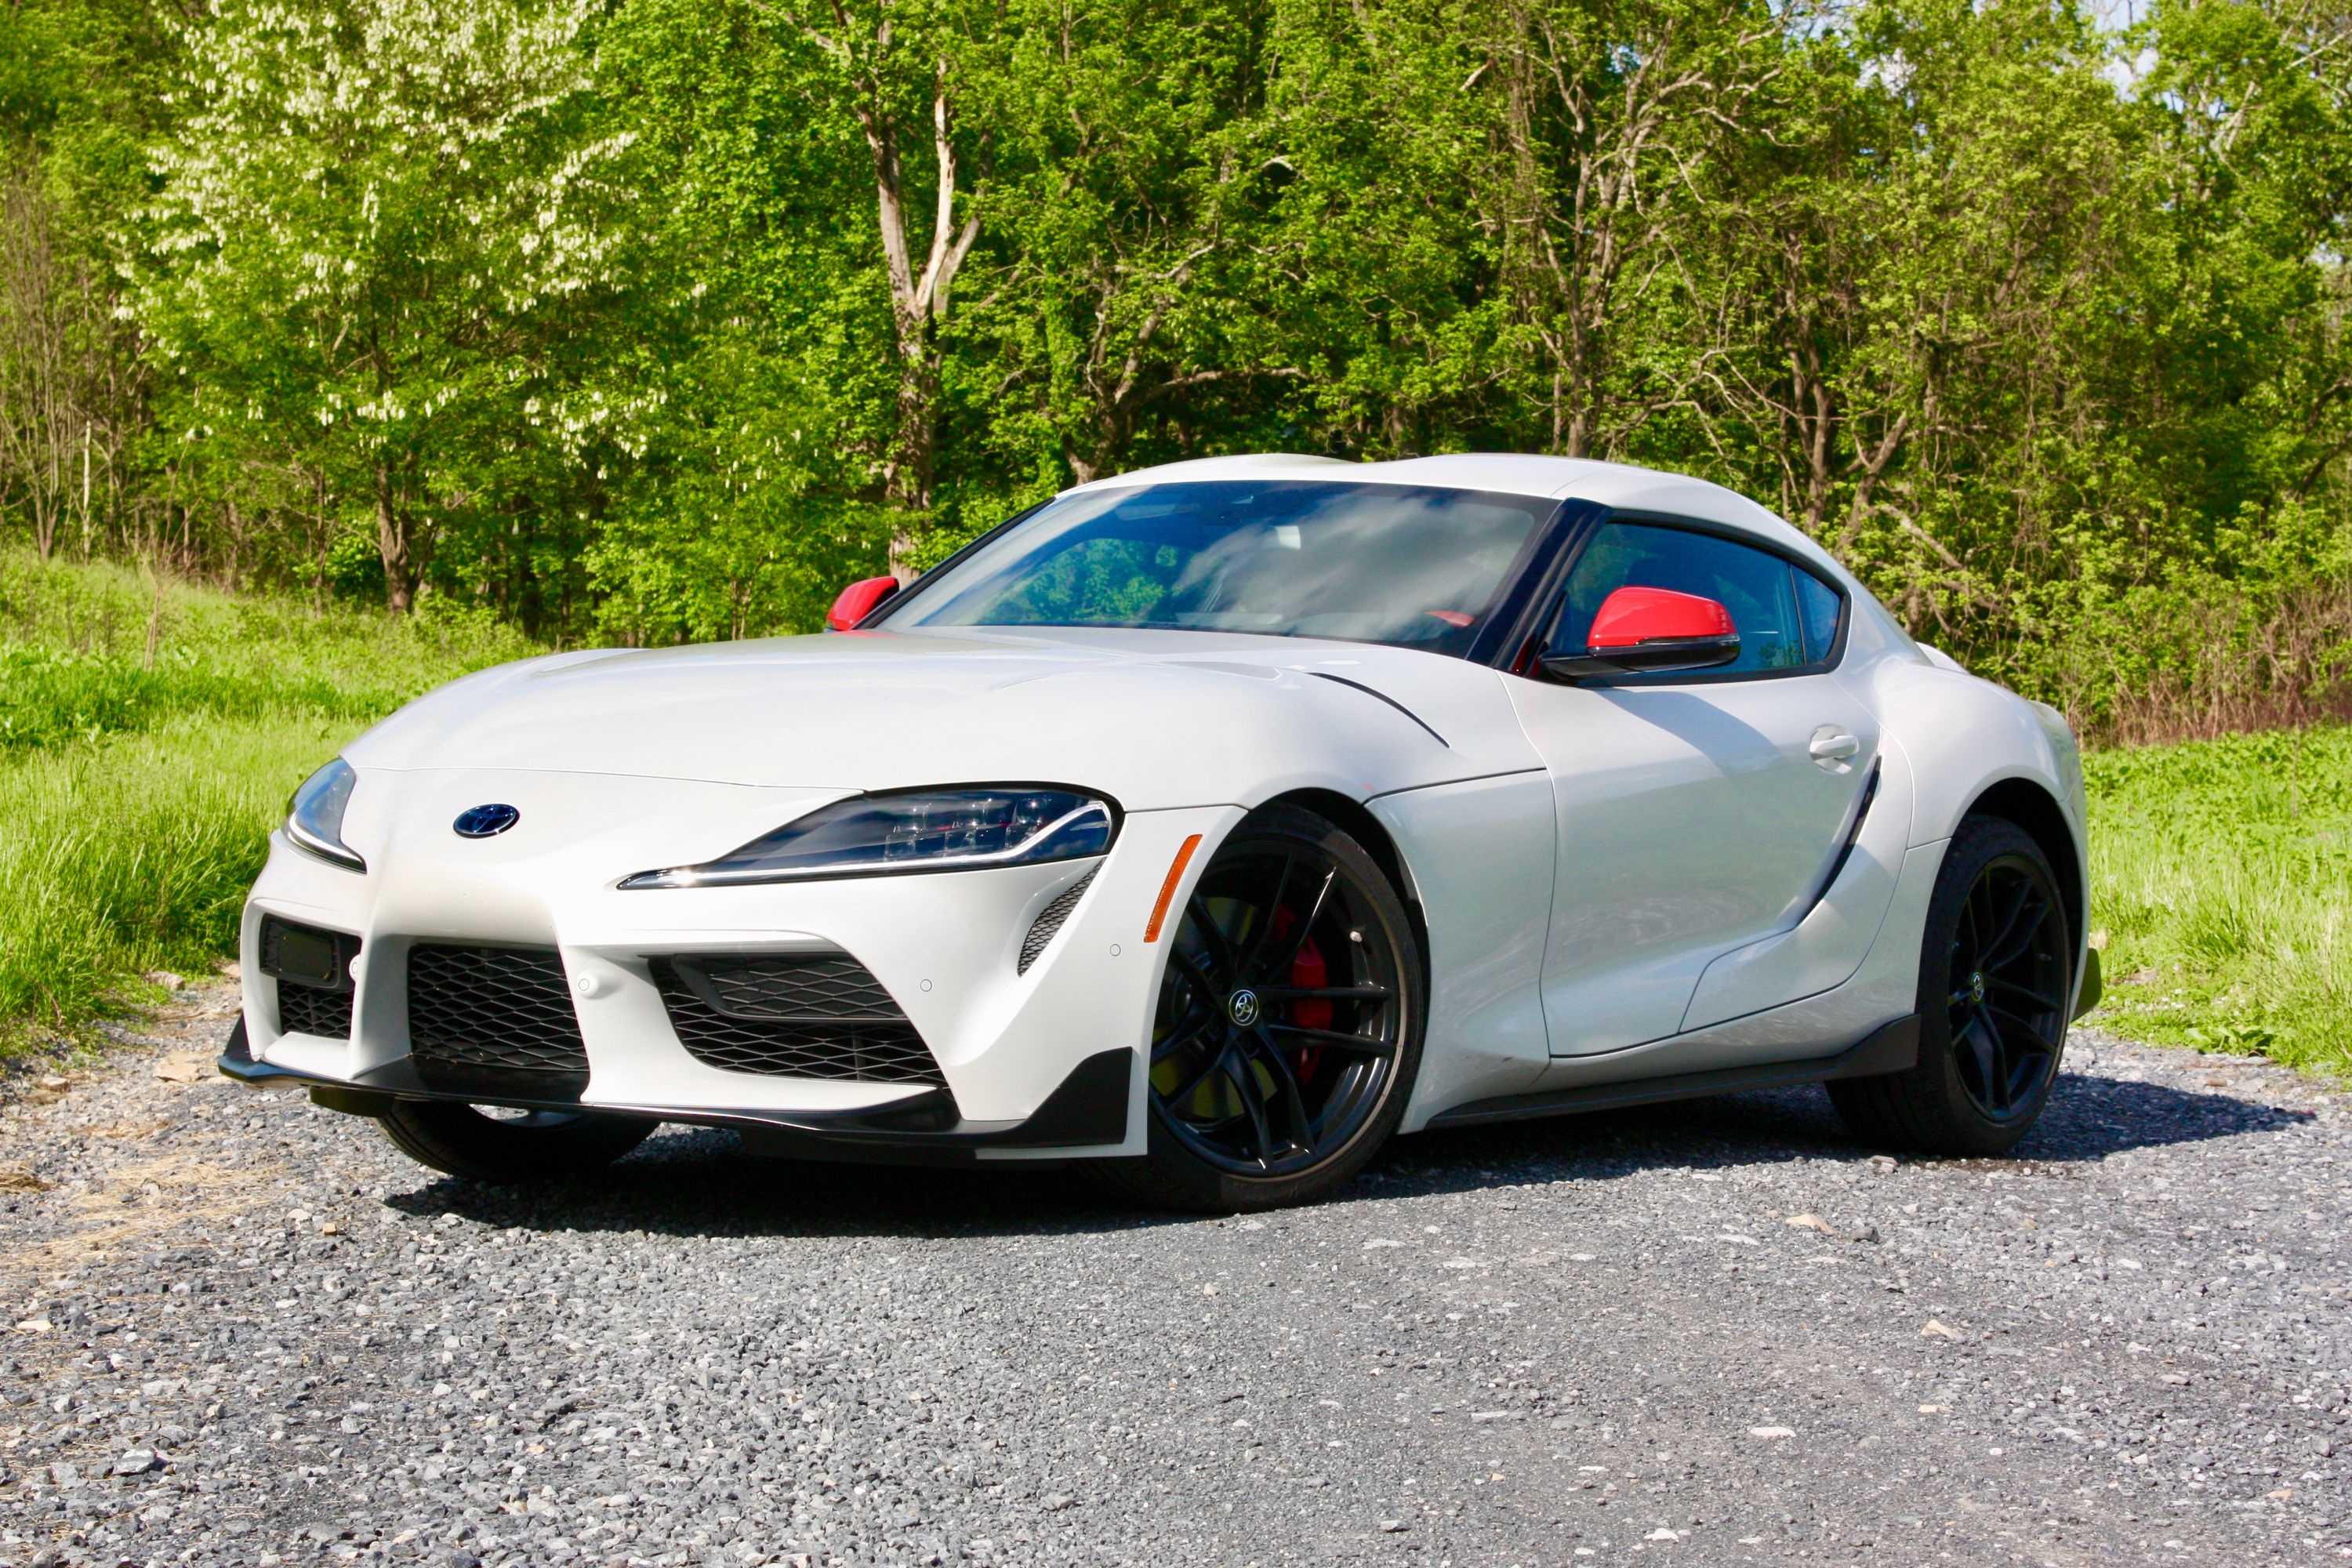 Toyota Supra: Latest News, Reviews, Specifications, Prices, Photo